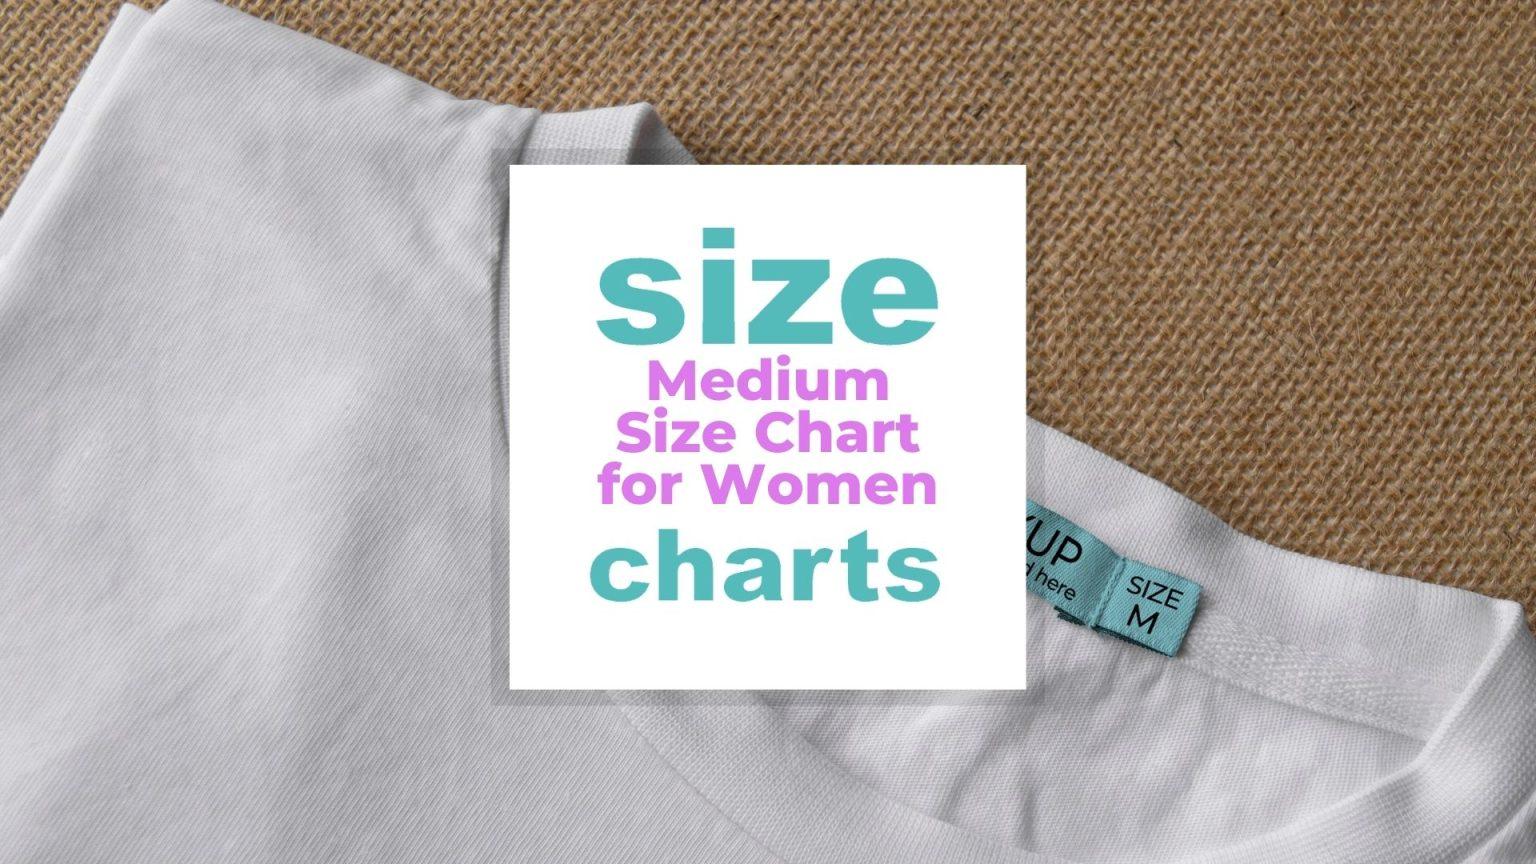 Medium Size Chart for Women (in clothes, belt,...) - Size-Charts.com